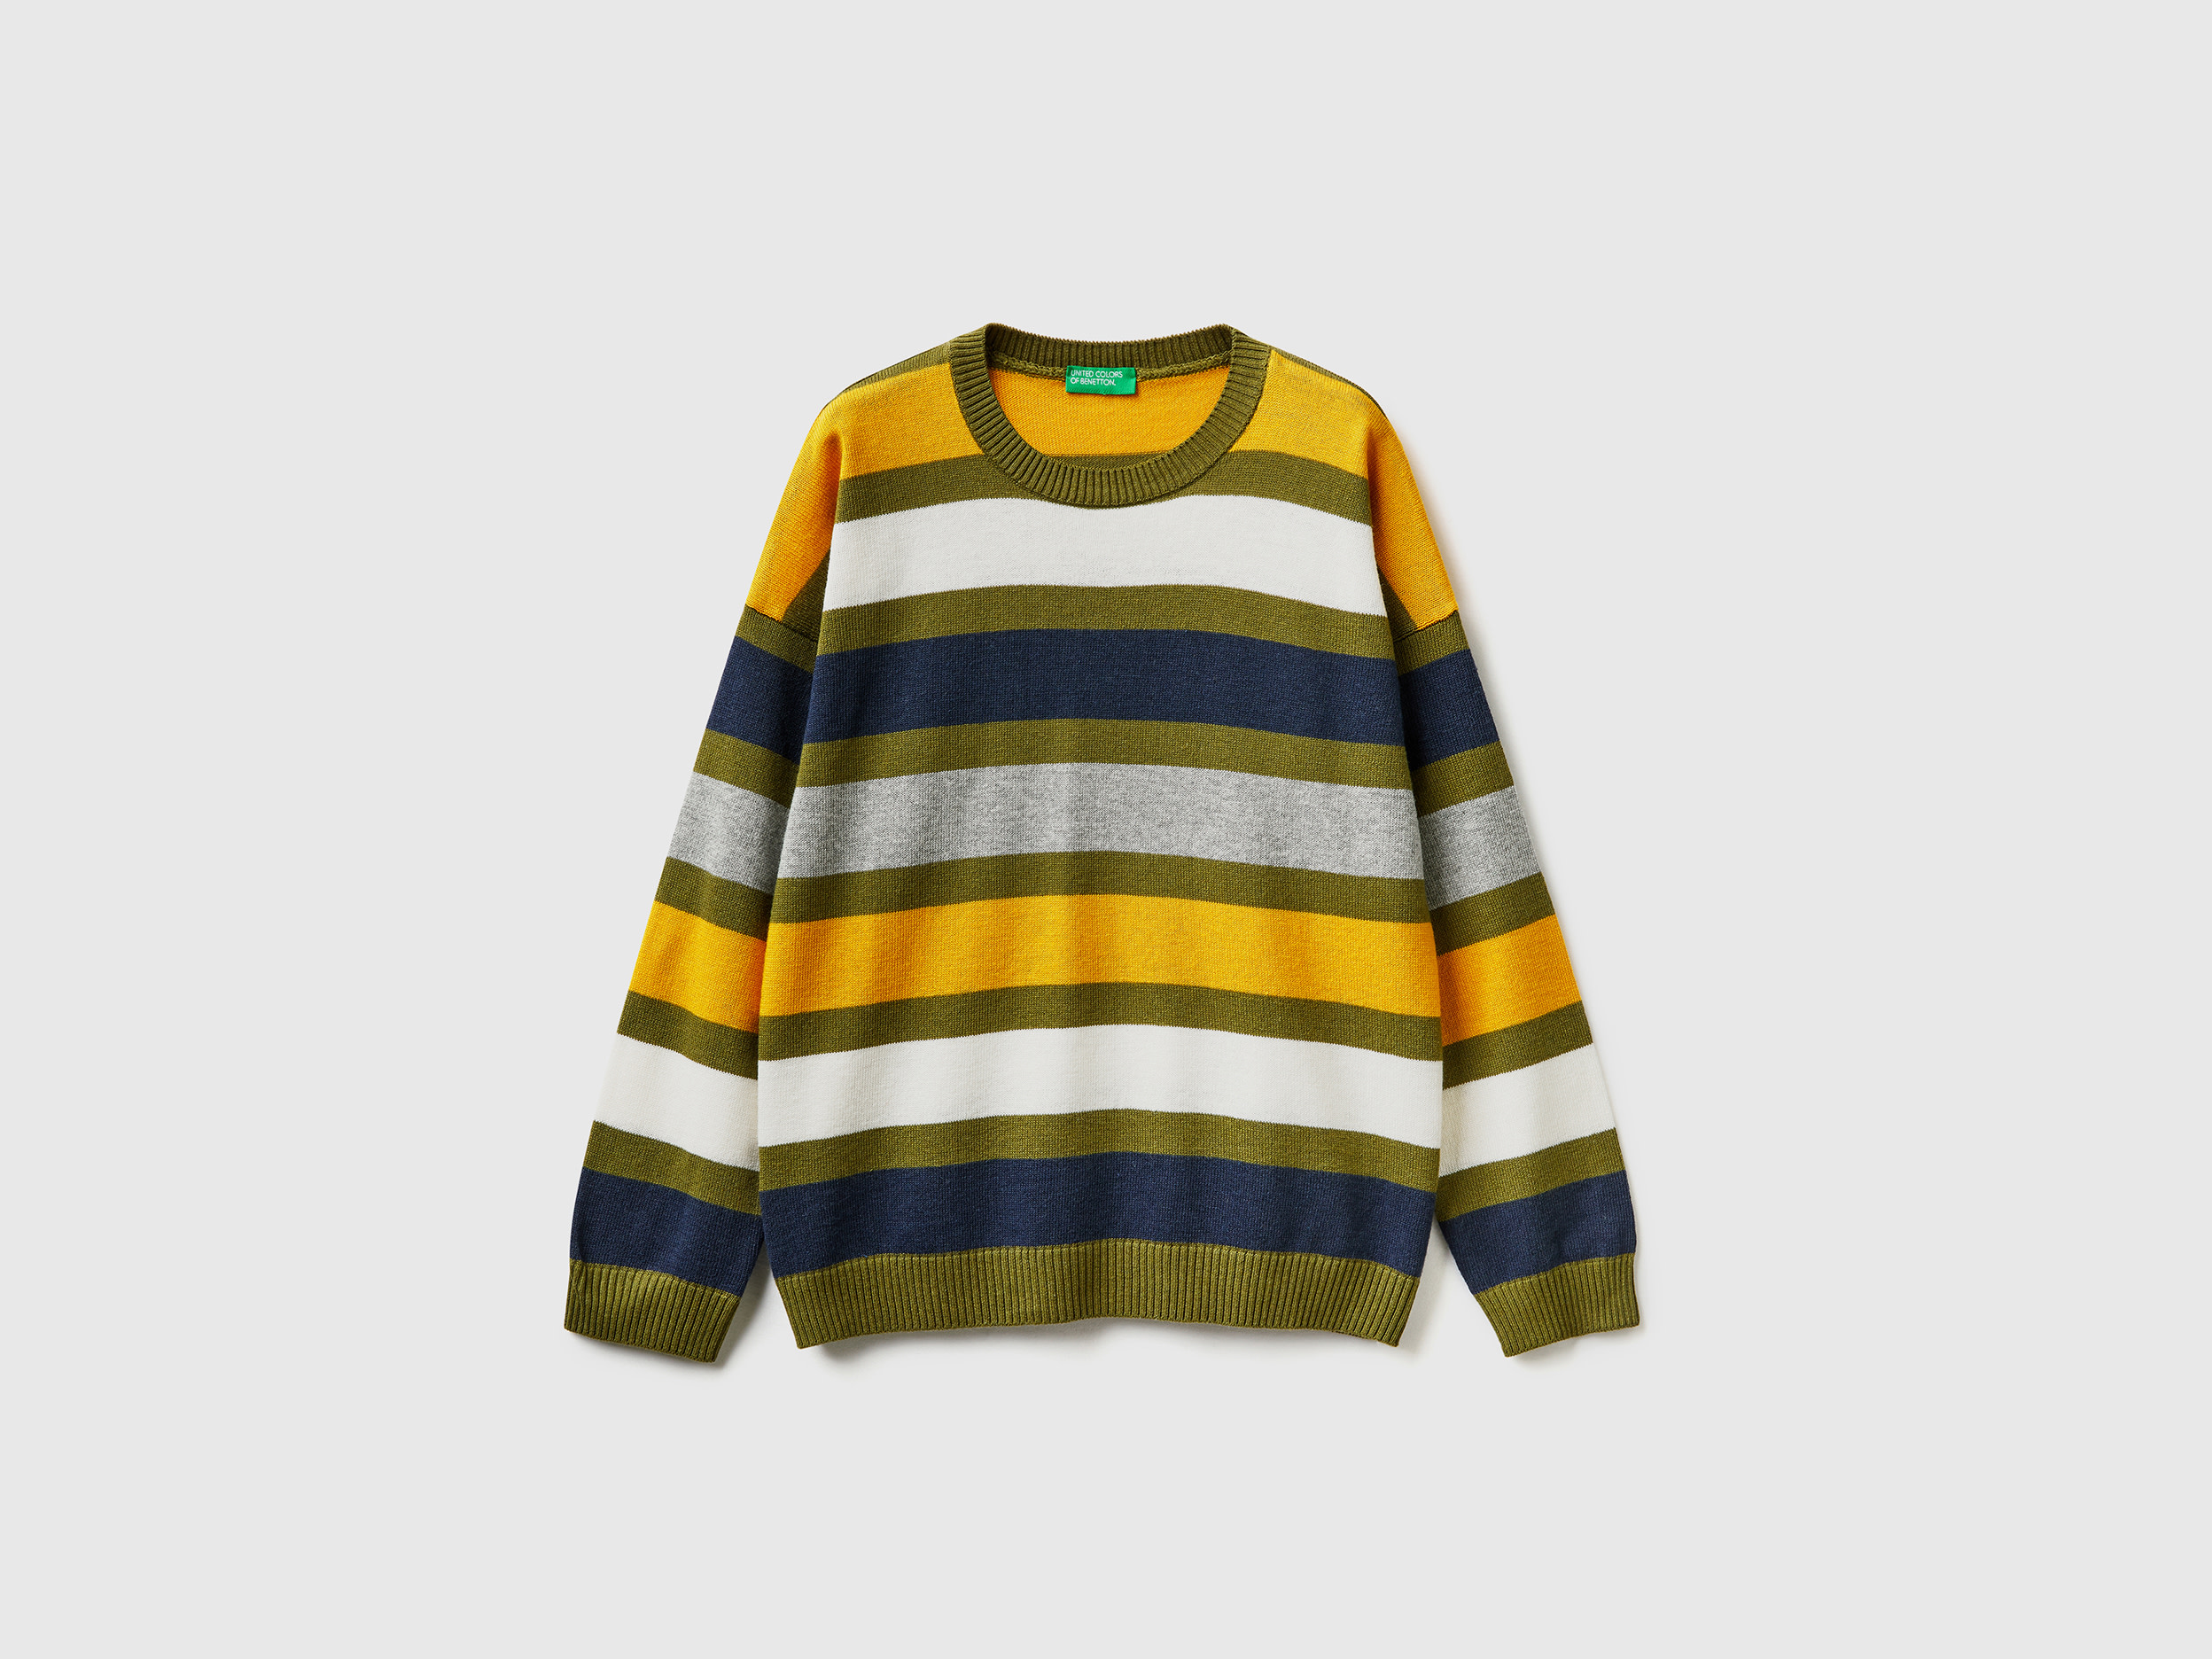 Benetton, Striped Sweater In Wool And Cotton Blend, size 3XL, Multi-color, Kids